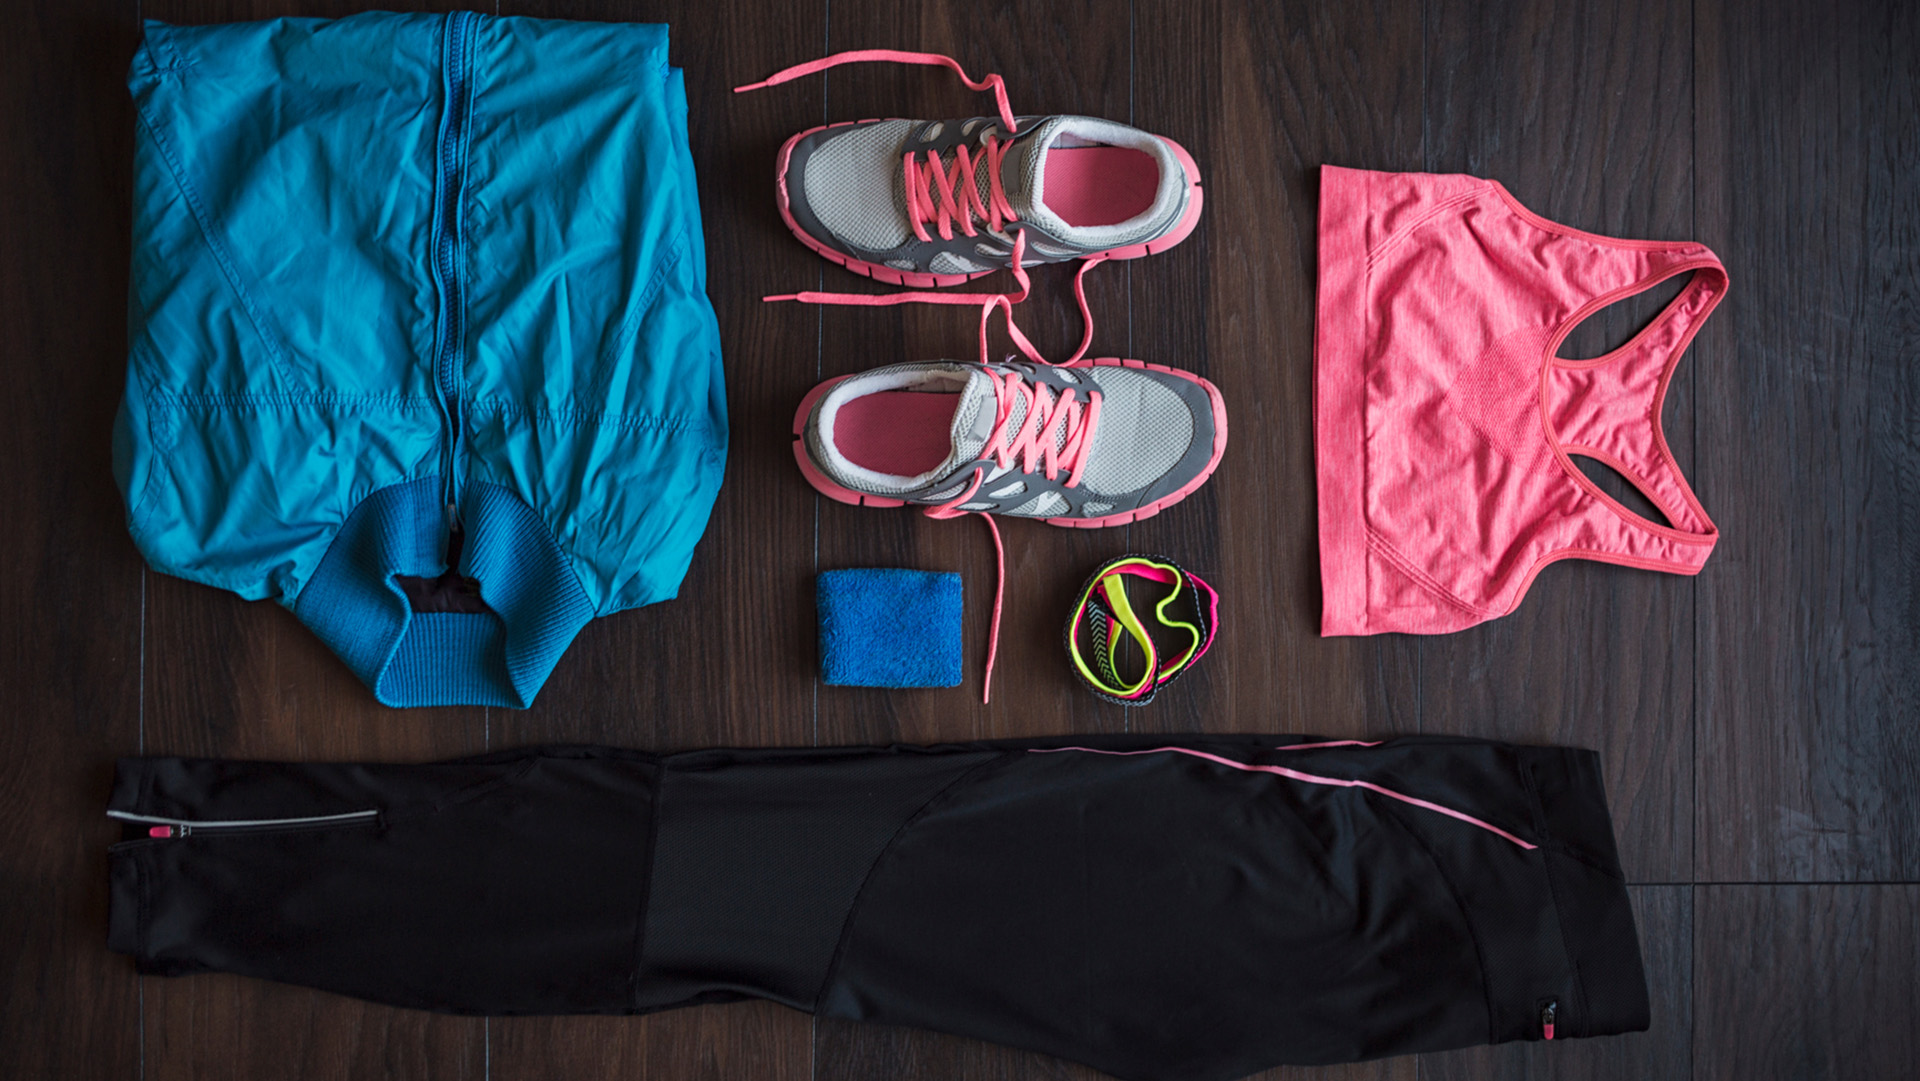 Clothes and accesories a woman needs for working out.